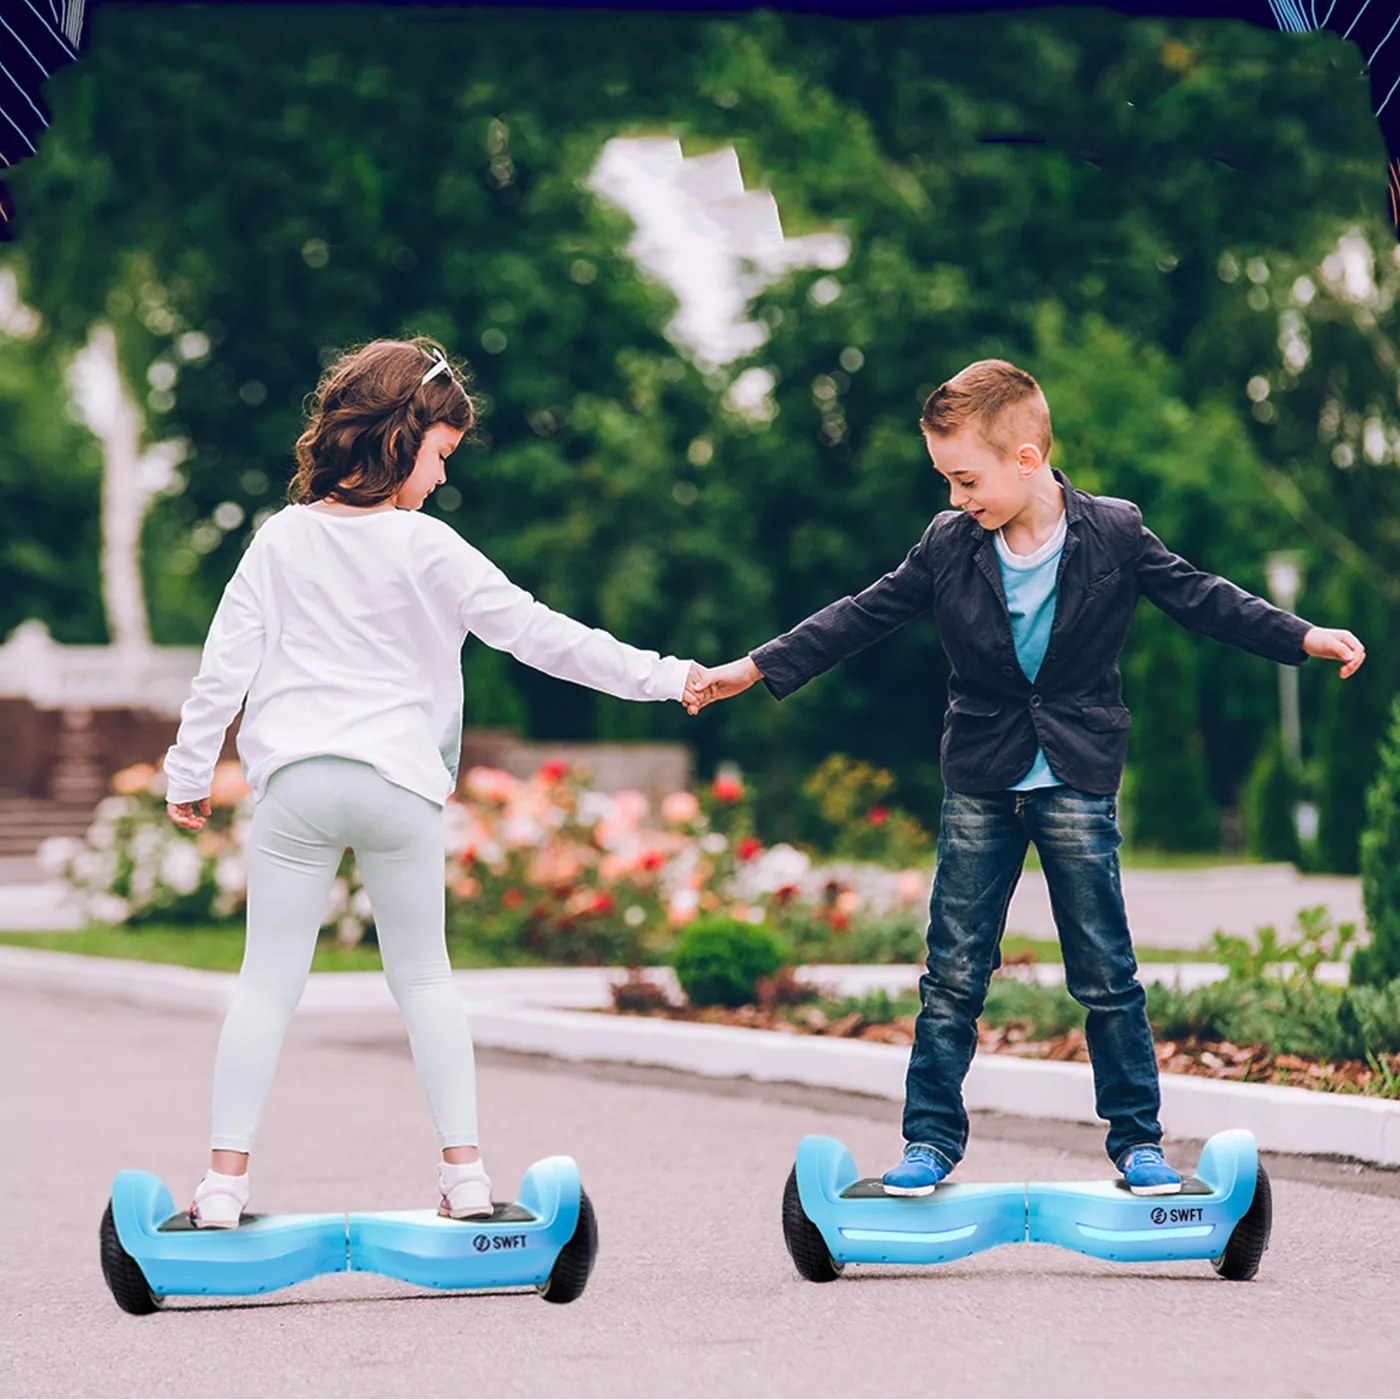 Kids playing with the blue hoverboards